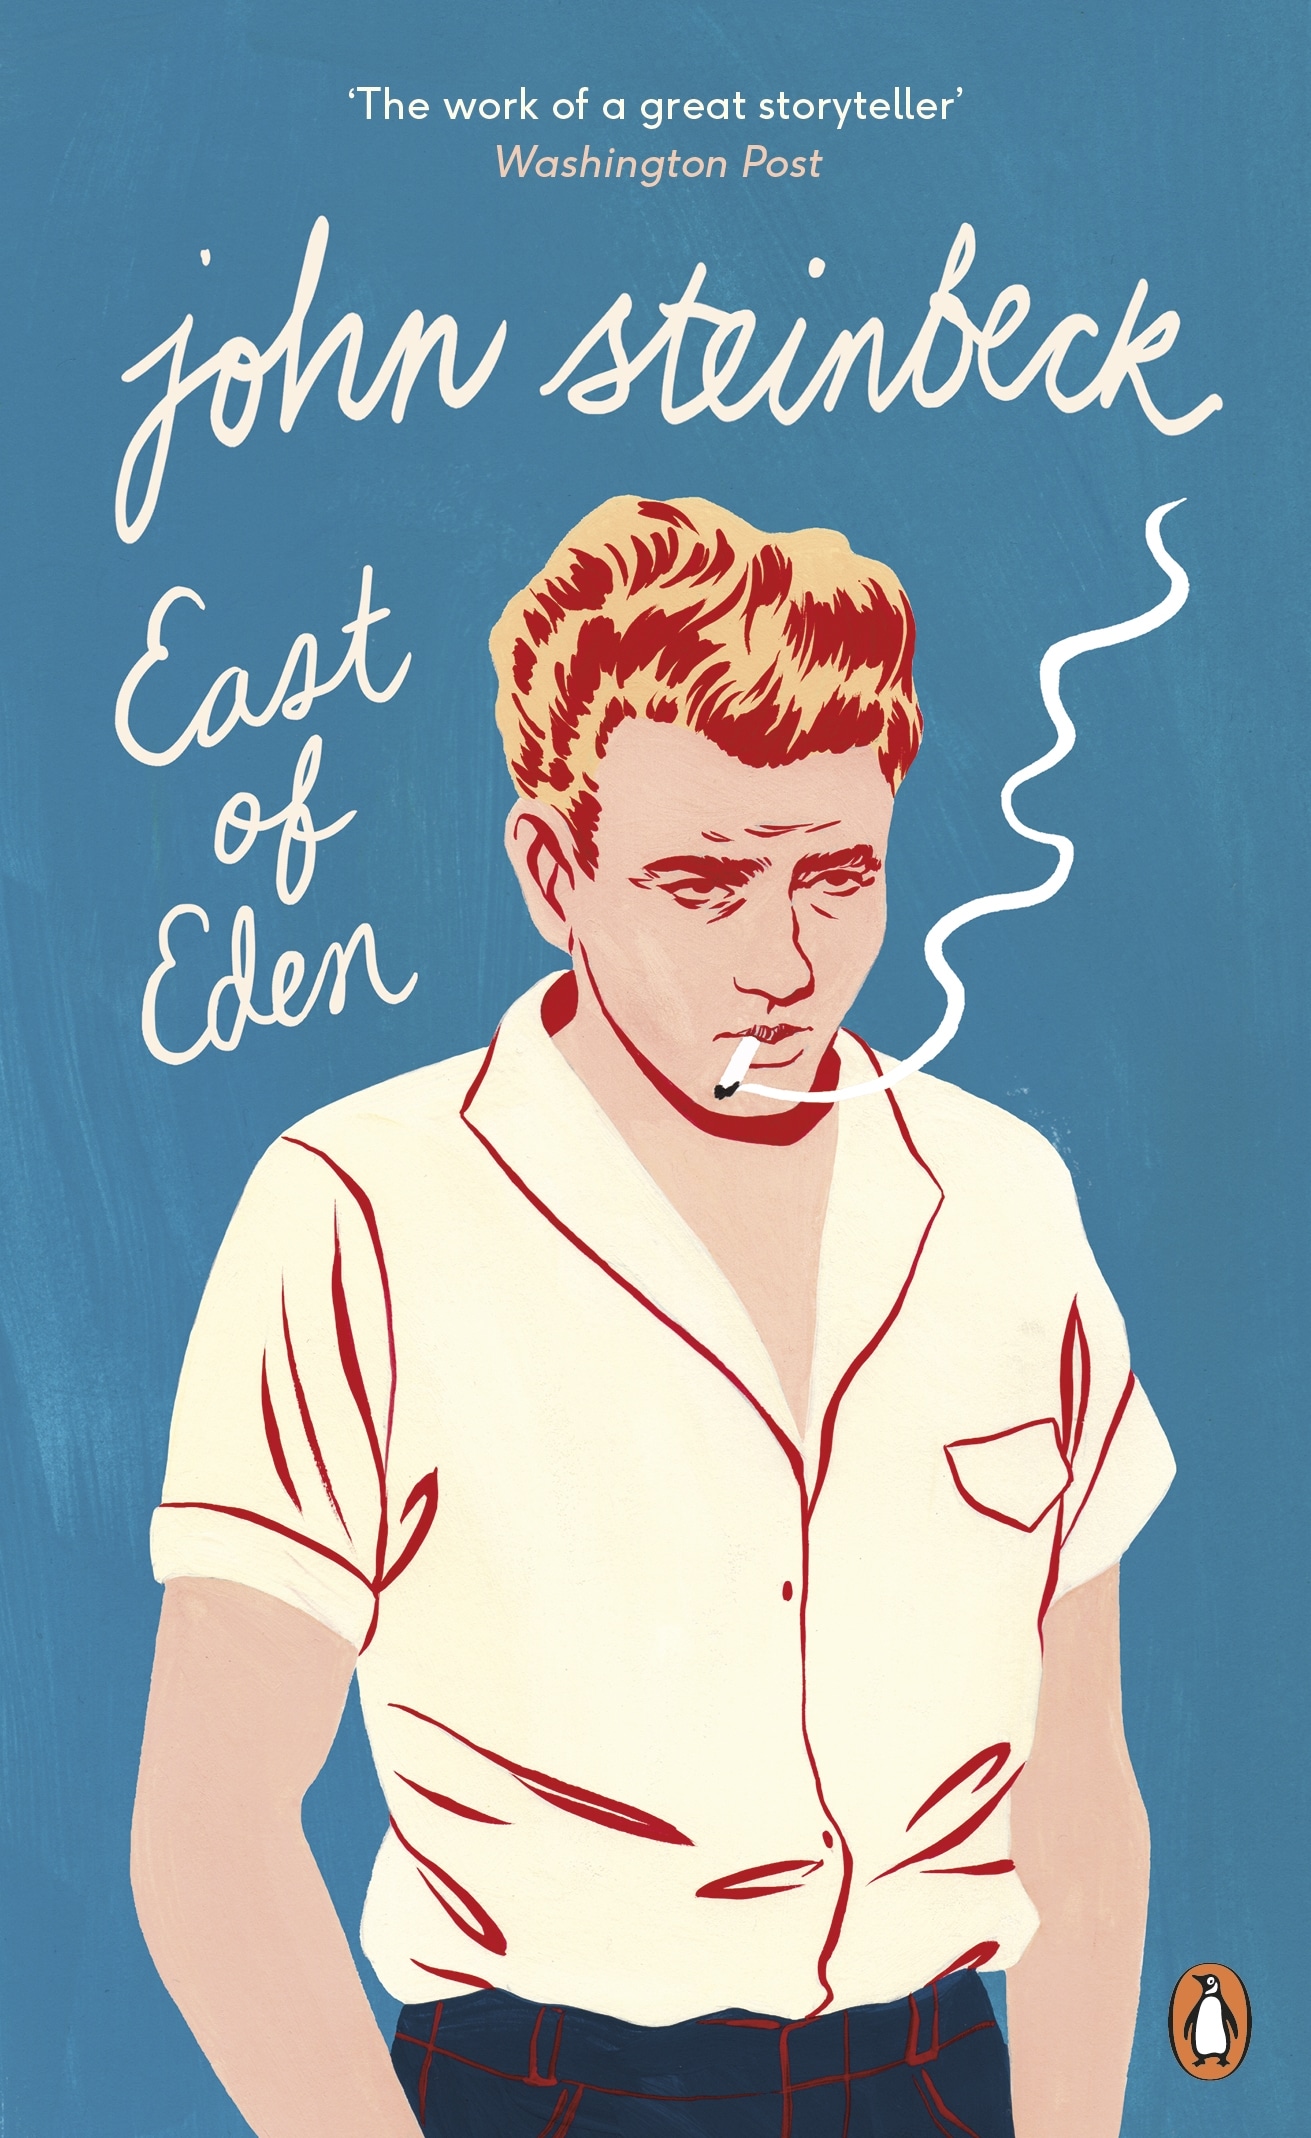 Book “East of Eden” by John Steinbeck — July 6, 2017